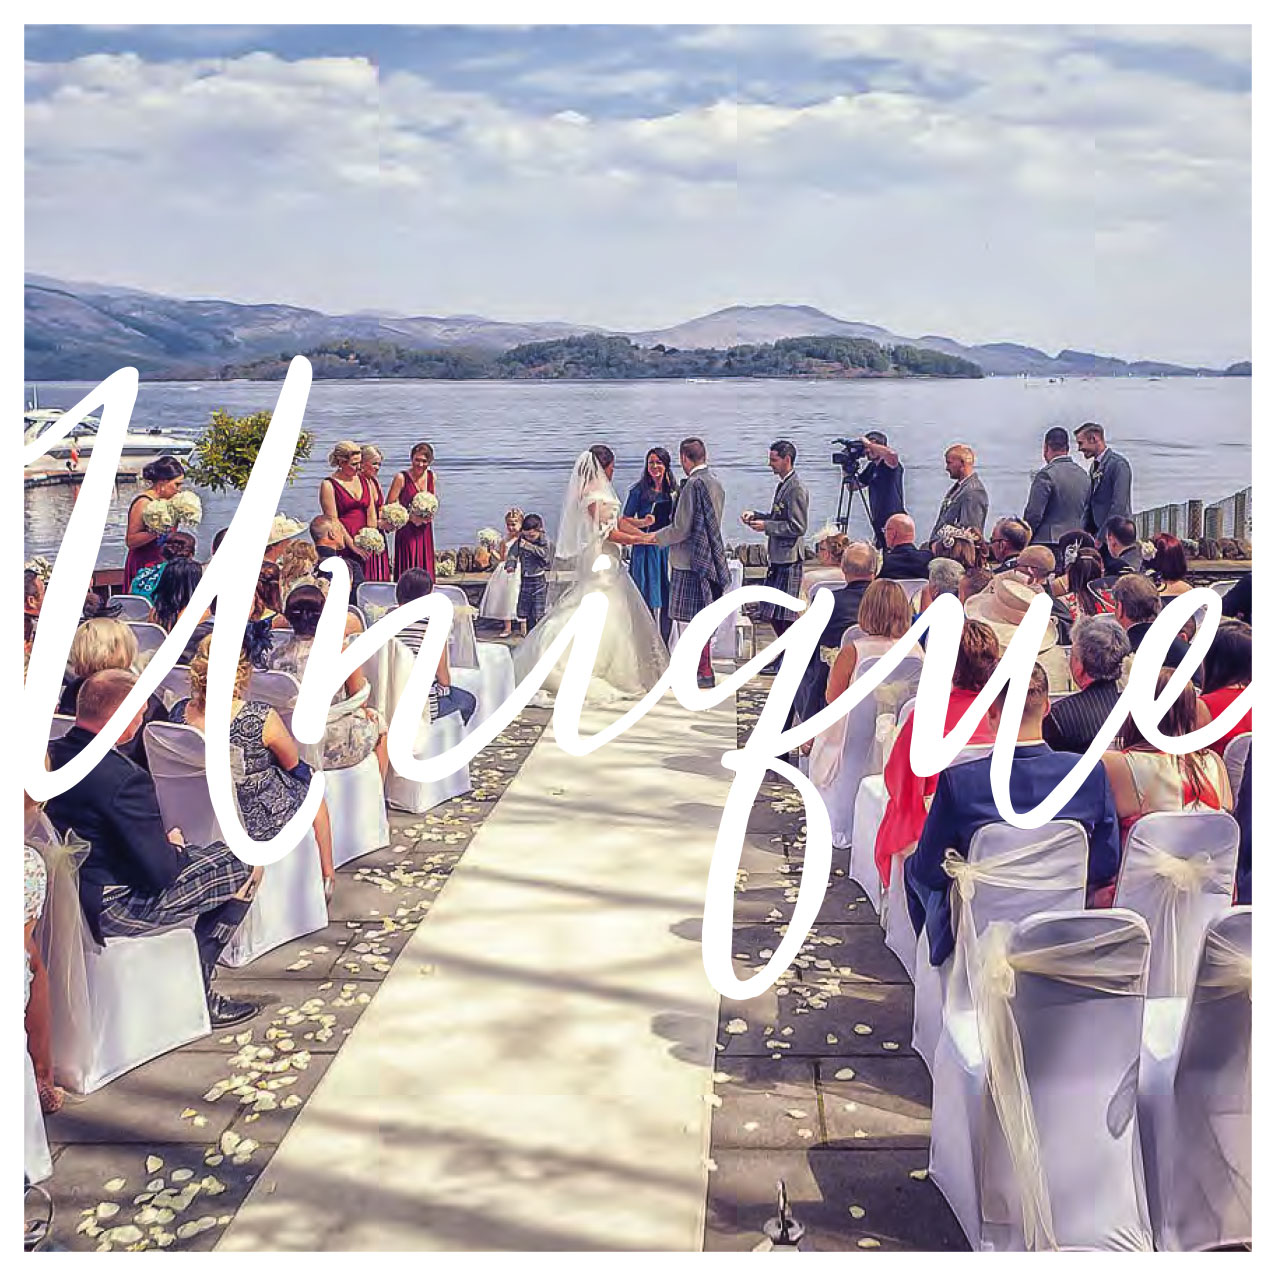 Lodge on Loch Lomond Wedding packages 2020 to 2021